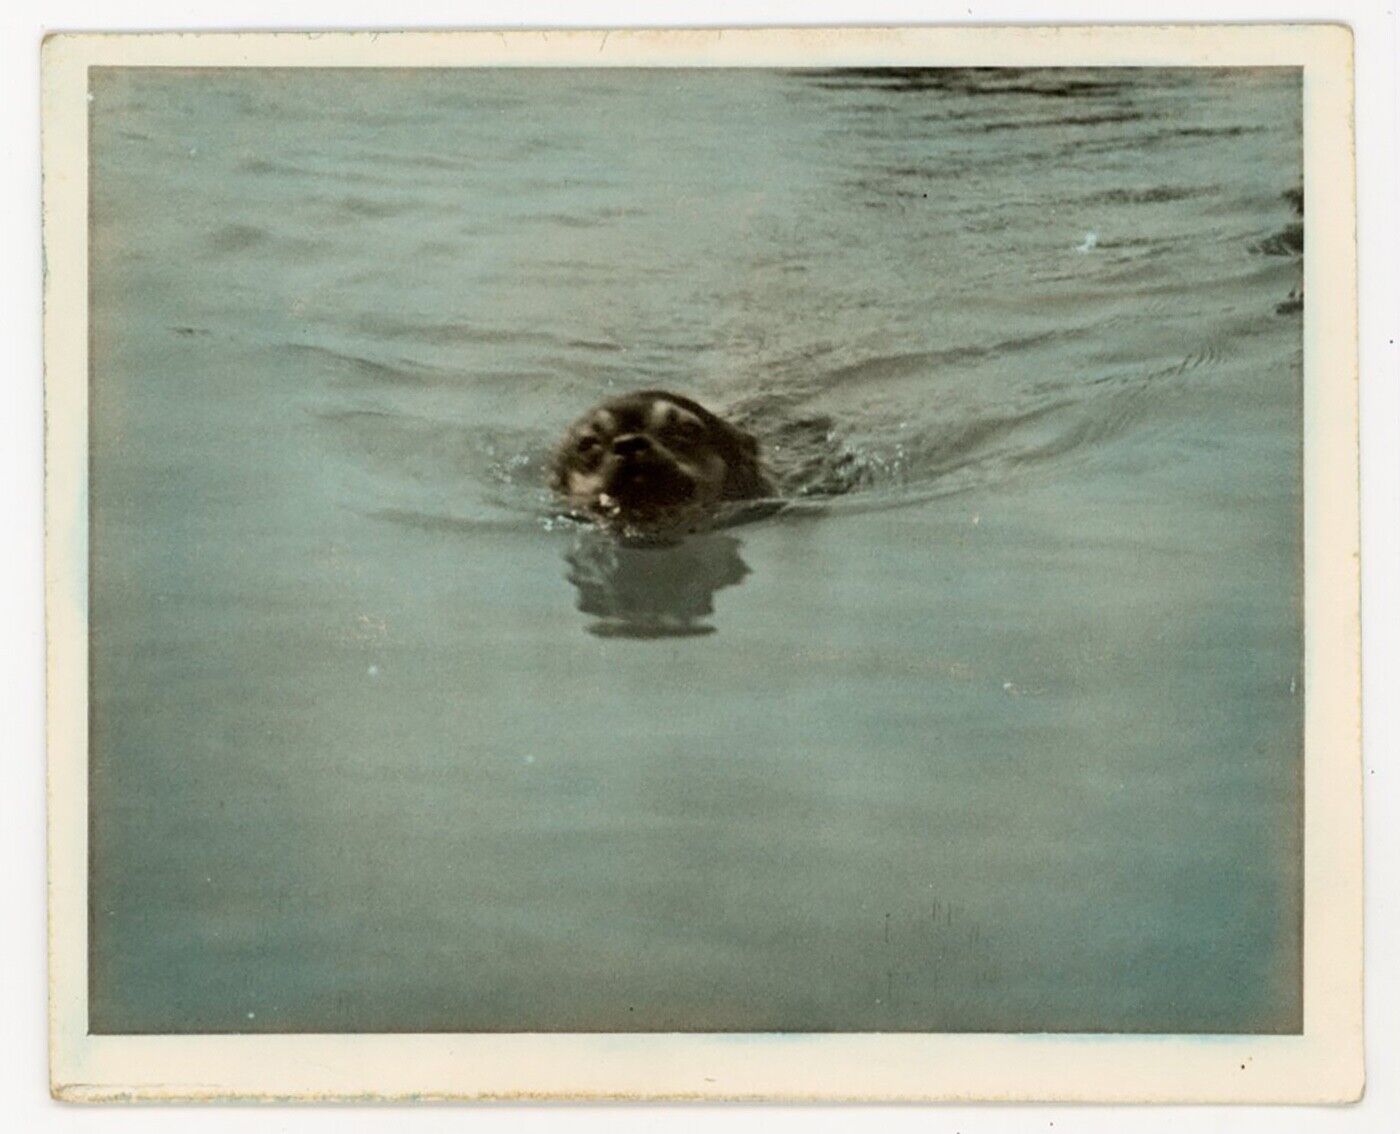 ABSTRACT minimal HAND TINTED dog swimming in WATER vintage 1940s PHOTO original